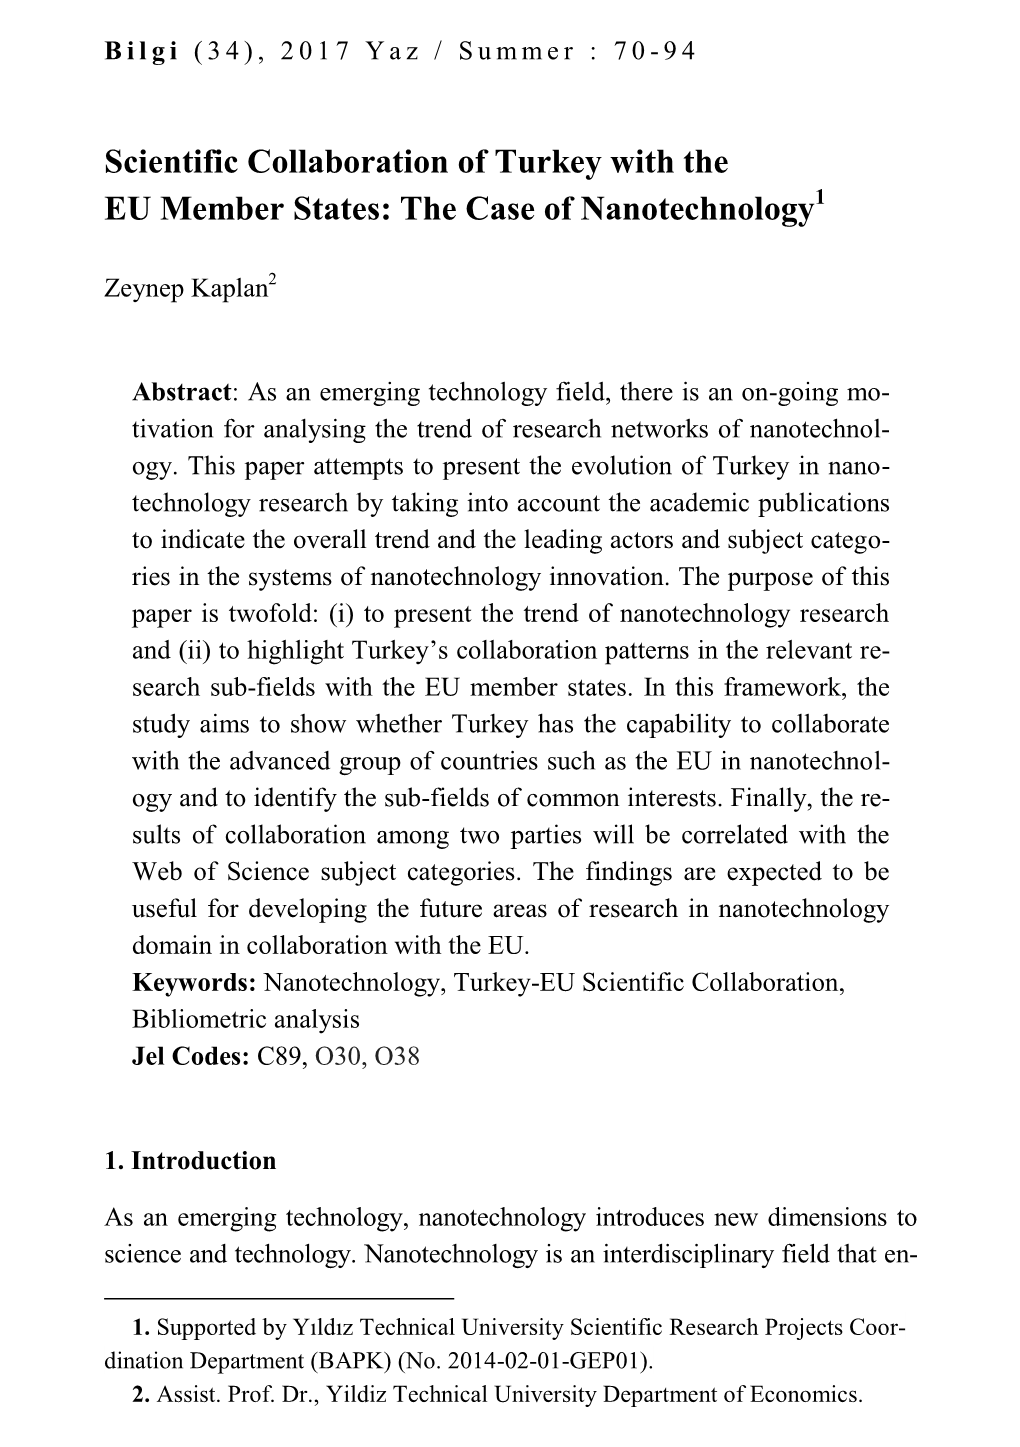 Scientific Collaboration of Turkey with the EU Member States: the Case of Nanotechnology1